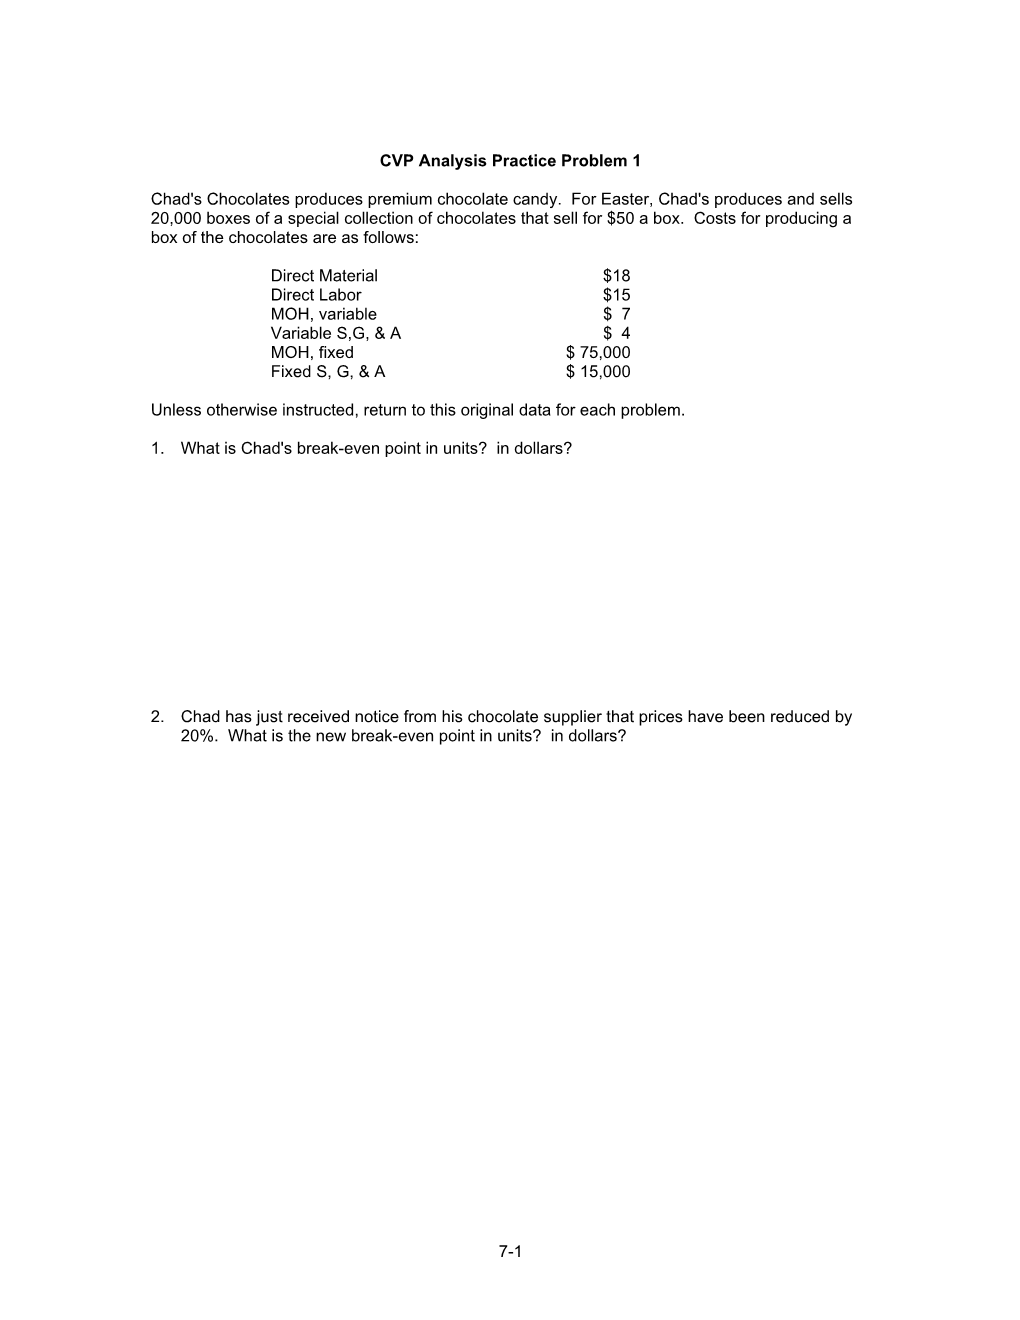 Handouts for Chapter 6 - CVP Analysis